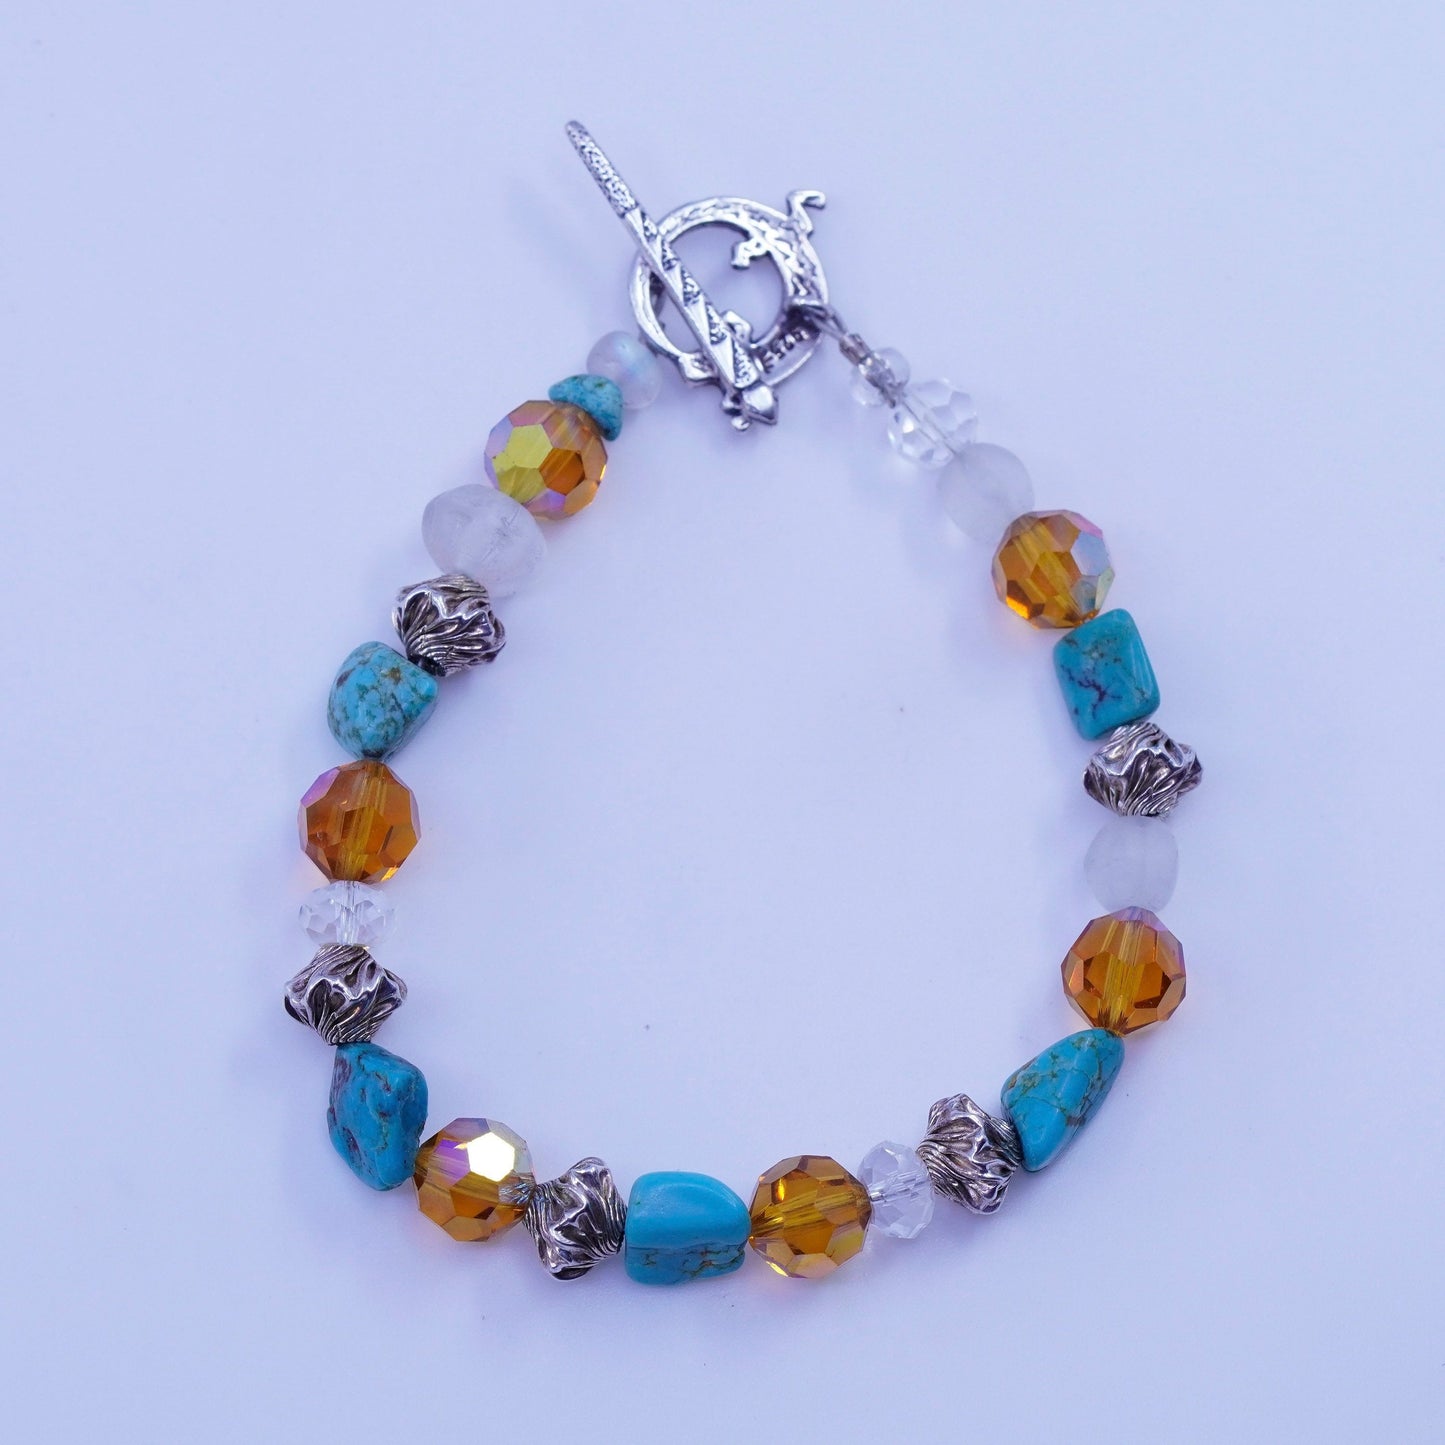 6.25”, Sterling 925 silver bracelet with turquoise citrine and lizard closure